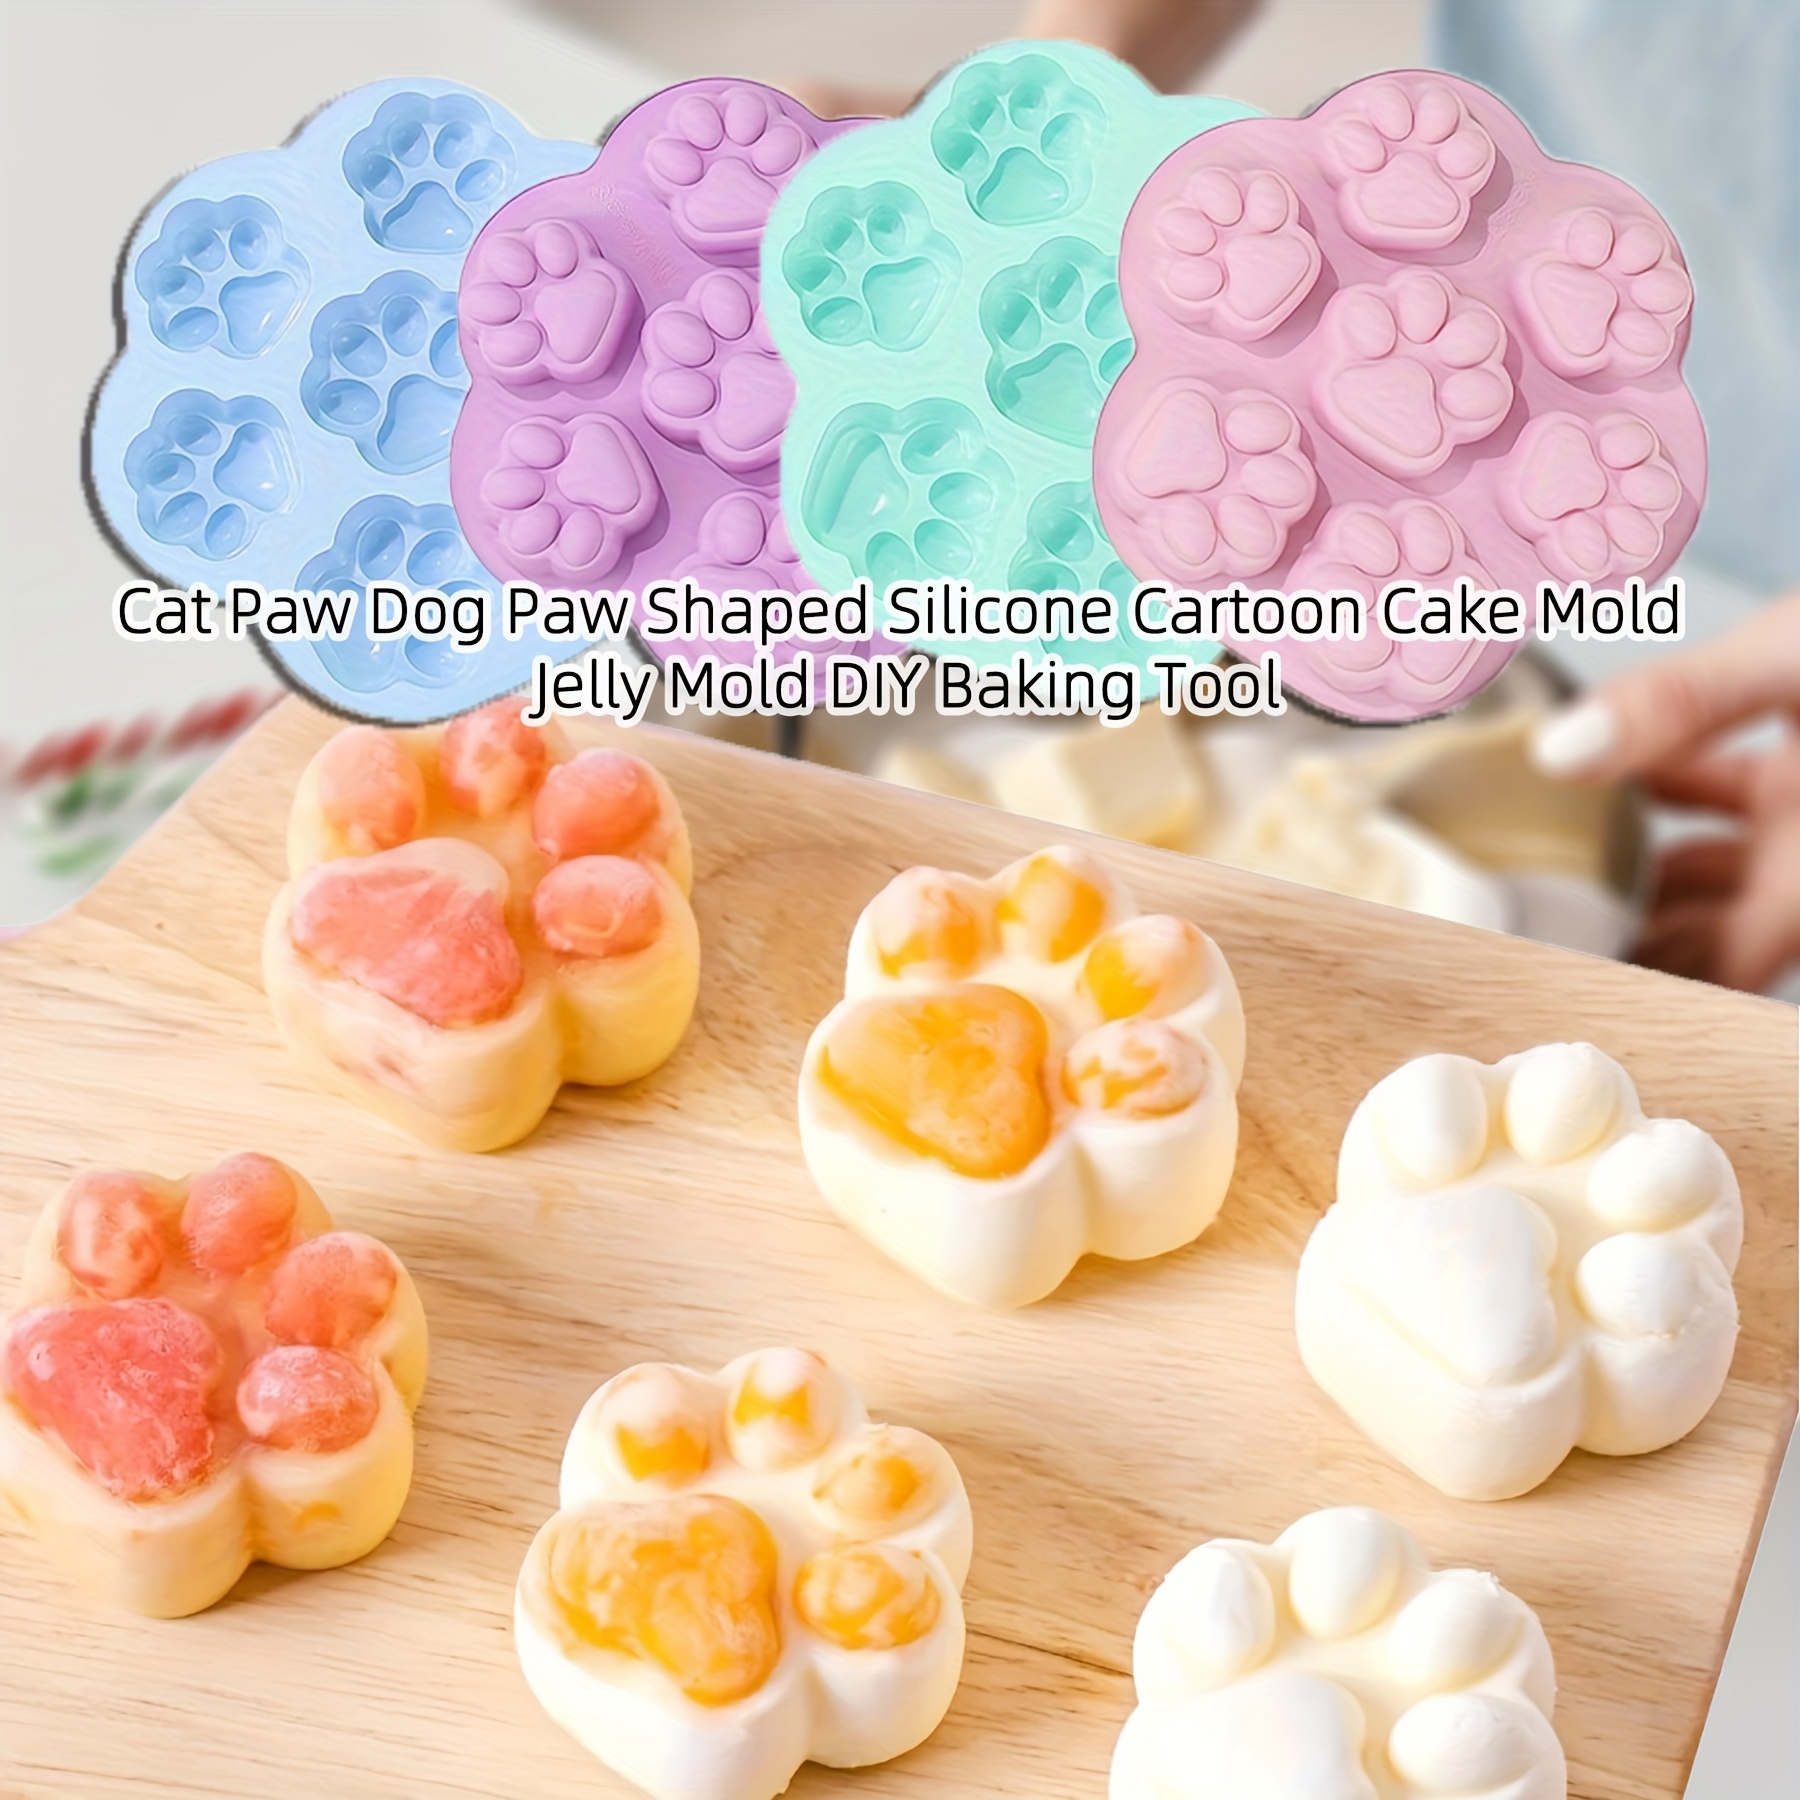 Cute Animal Ice Cube Trays 3 Pack Silicone Easy Release Ice Molds Trays/DIY  Chocolate Mold Candy Mold Cake Mold with Duck Fish and Fish Bones